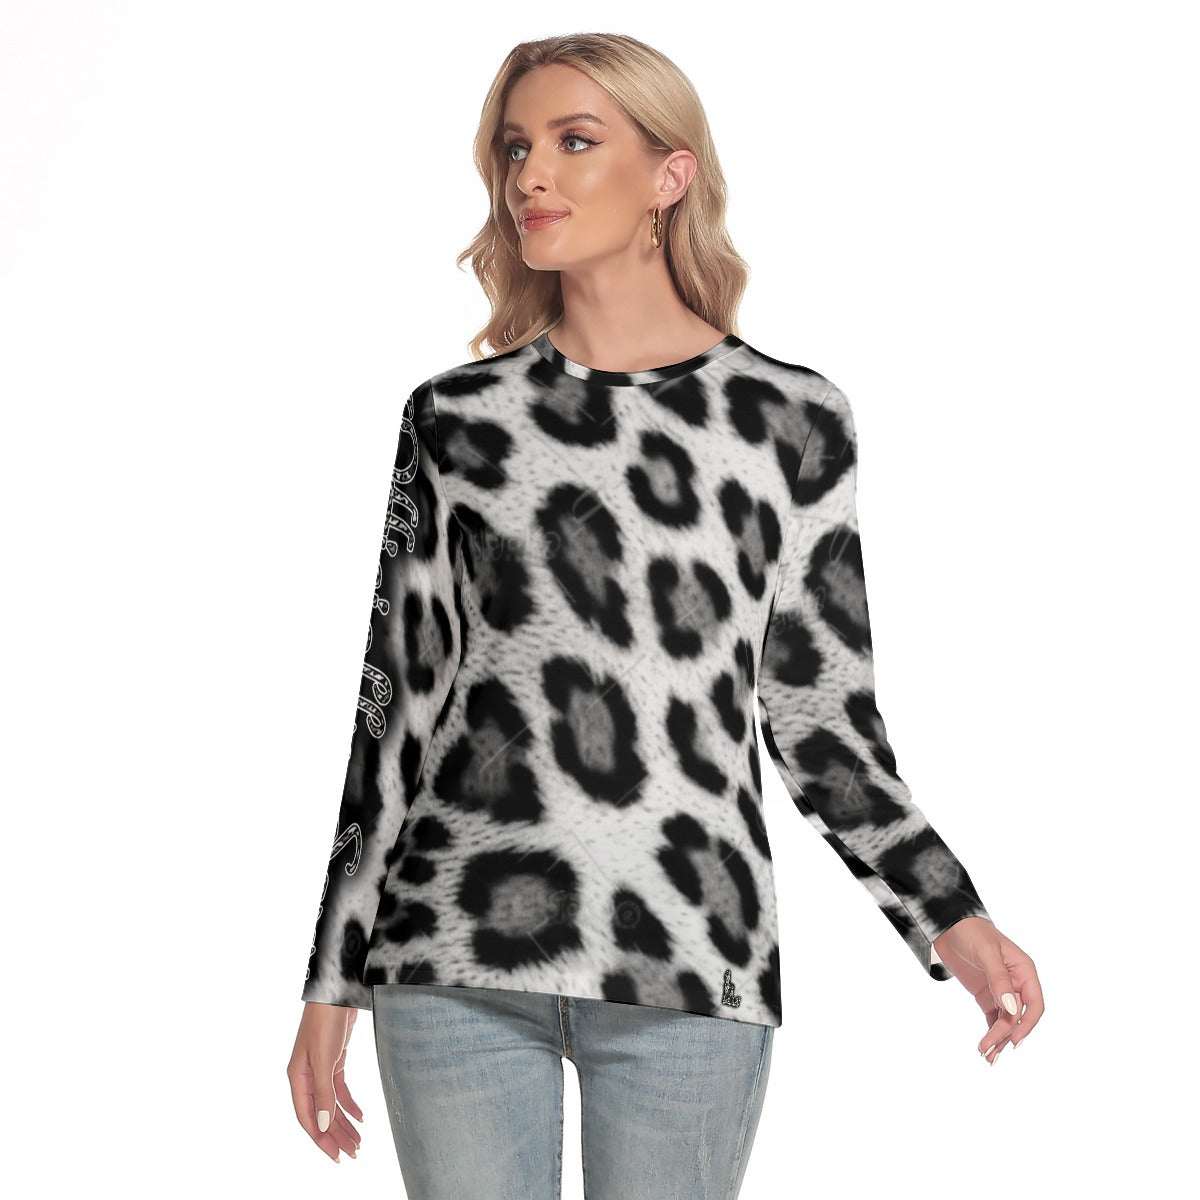 Officially Sexy Snow Leopard Print Collection Women's AOLP O-neck Long Sleeve T-shirt (English) 1